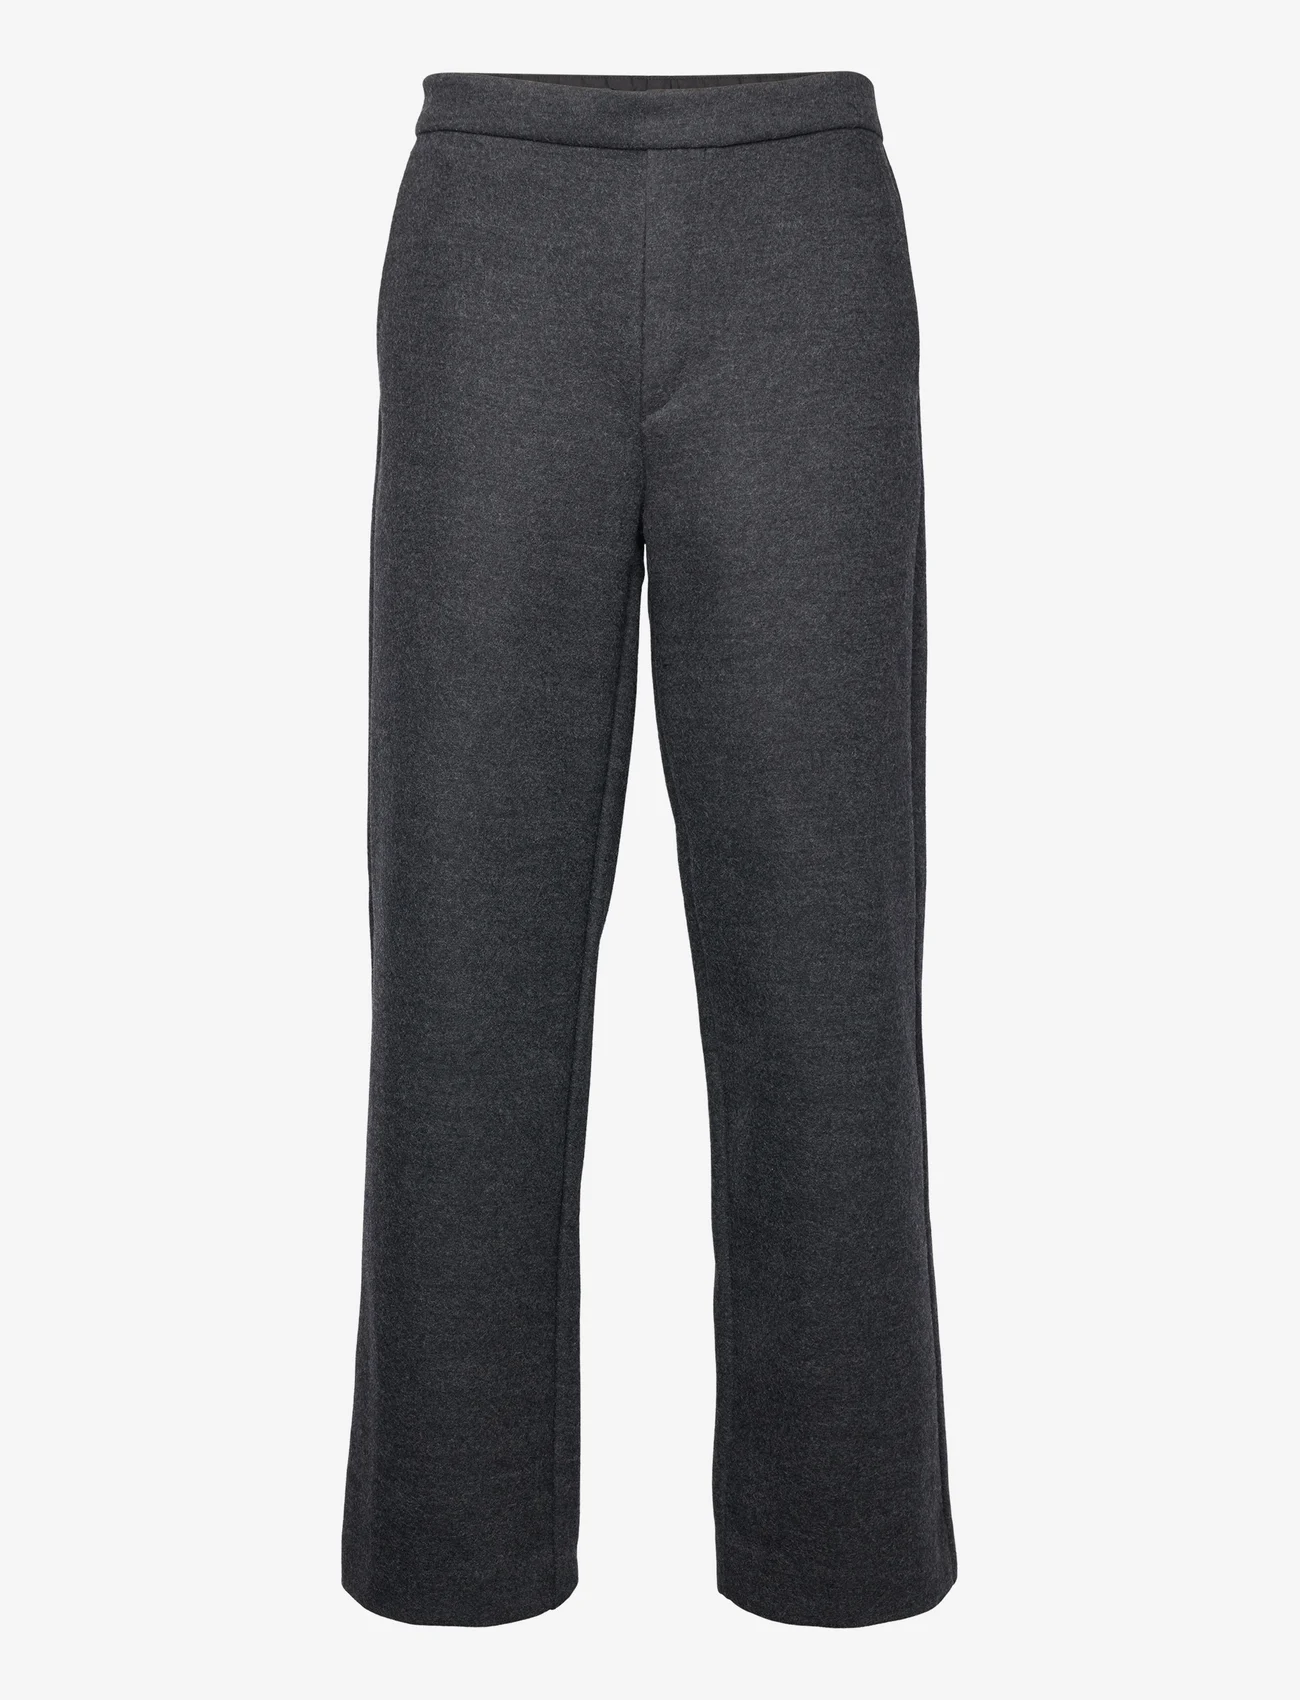 Urban Pioneers - Socrates Pants - chinos - charcoal - 0